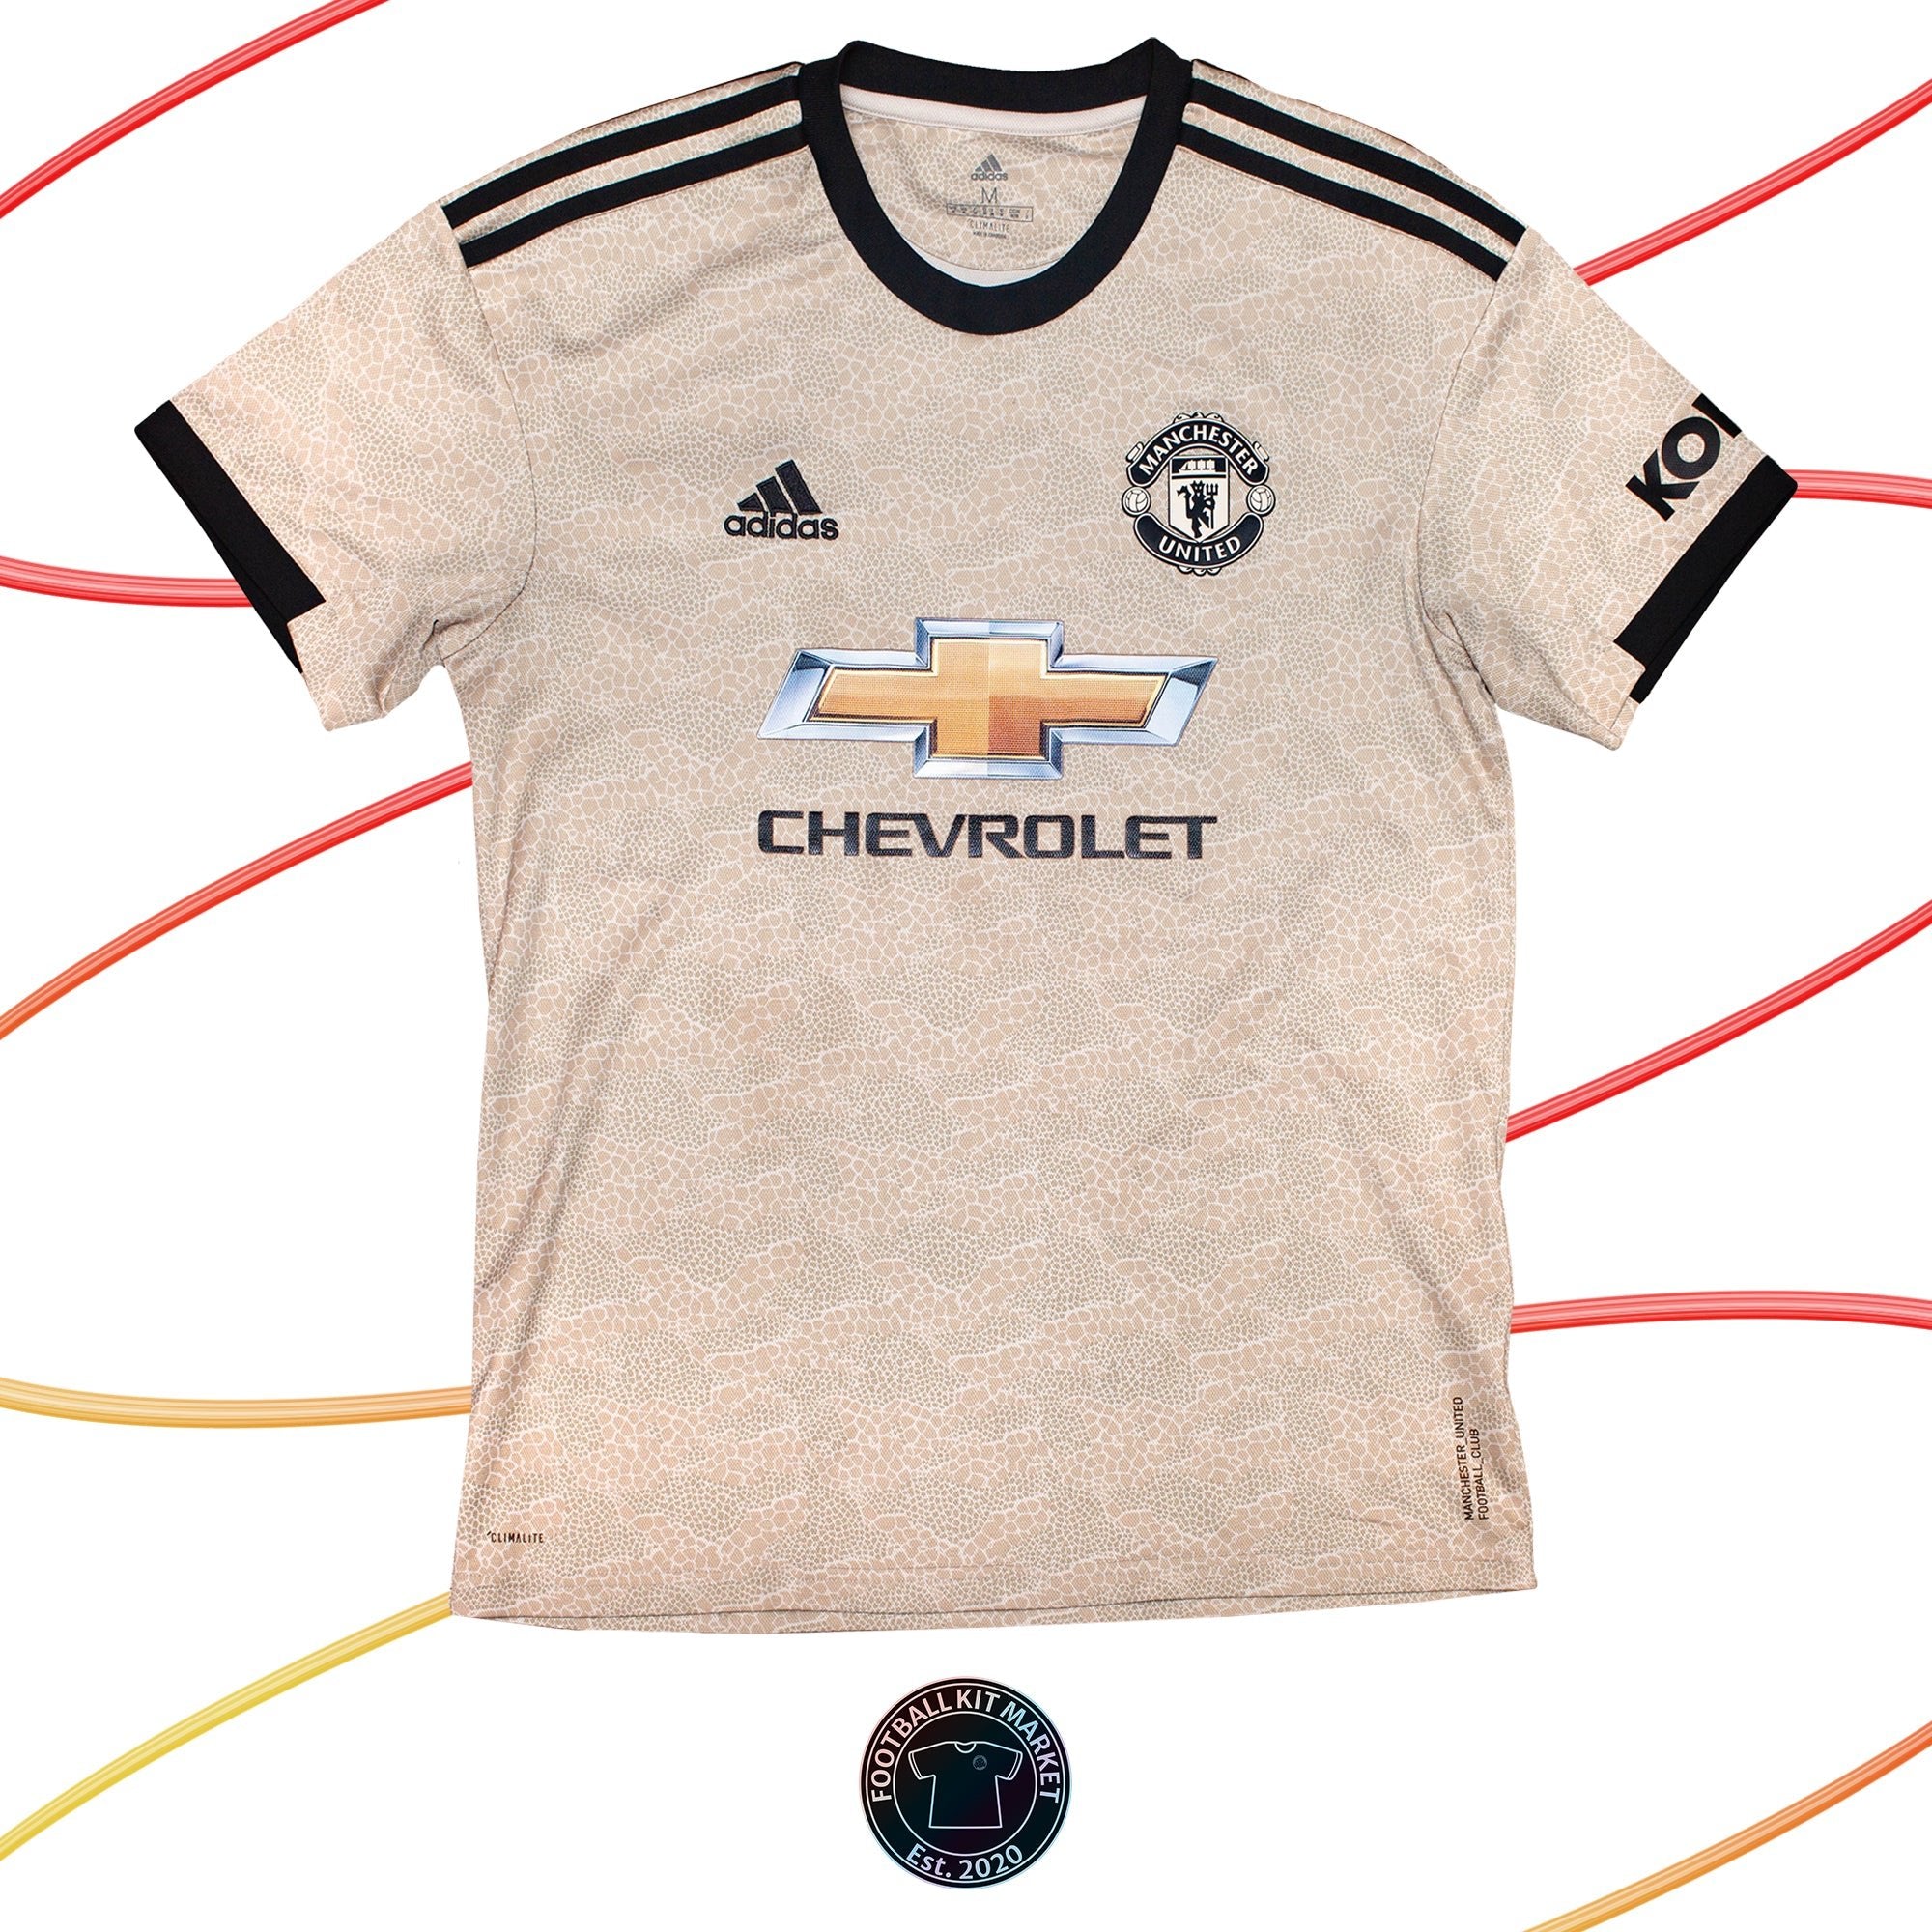 Genuine MANCHESTER UNITED Away (2019-2020) - ADIDAS (M) - Product Image from Football Kit Market